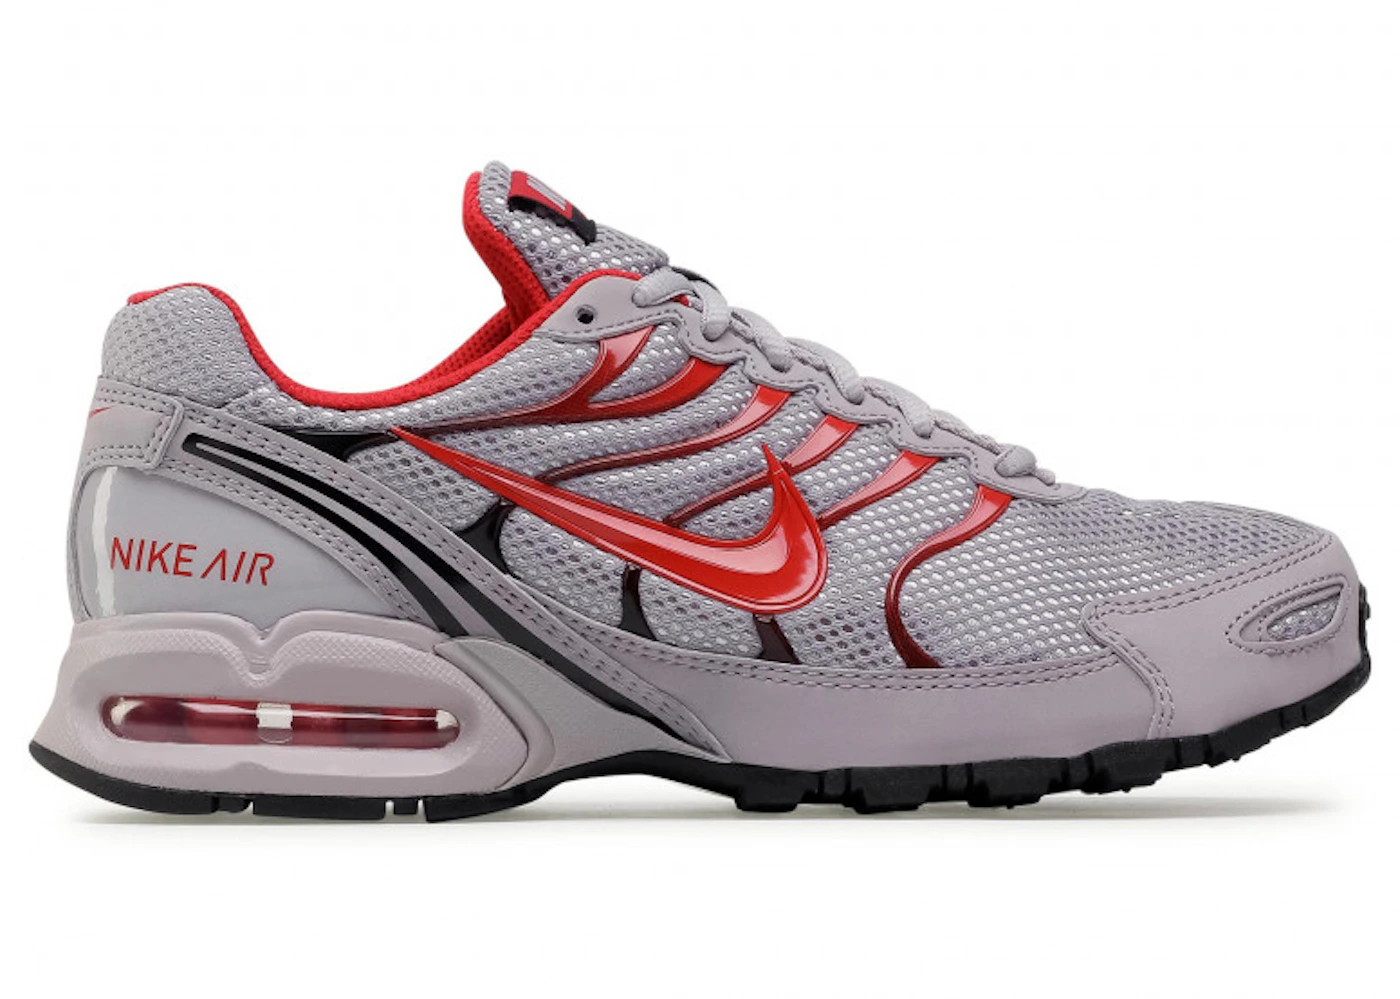 Nike Air Max Torch 4 Atmosphere Grey University Red Hombre - CI2202-001 ...